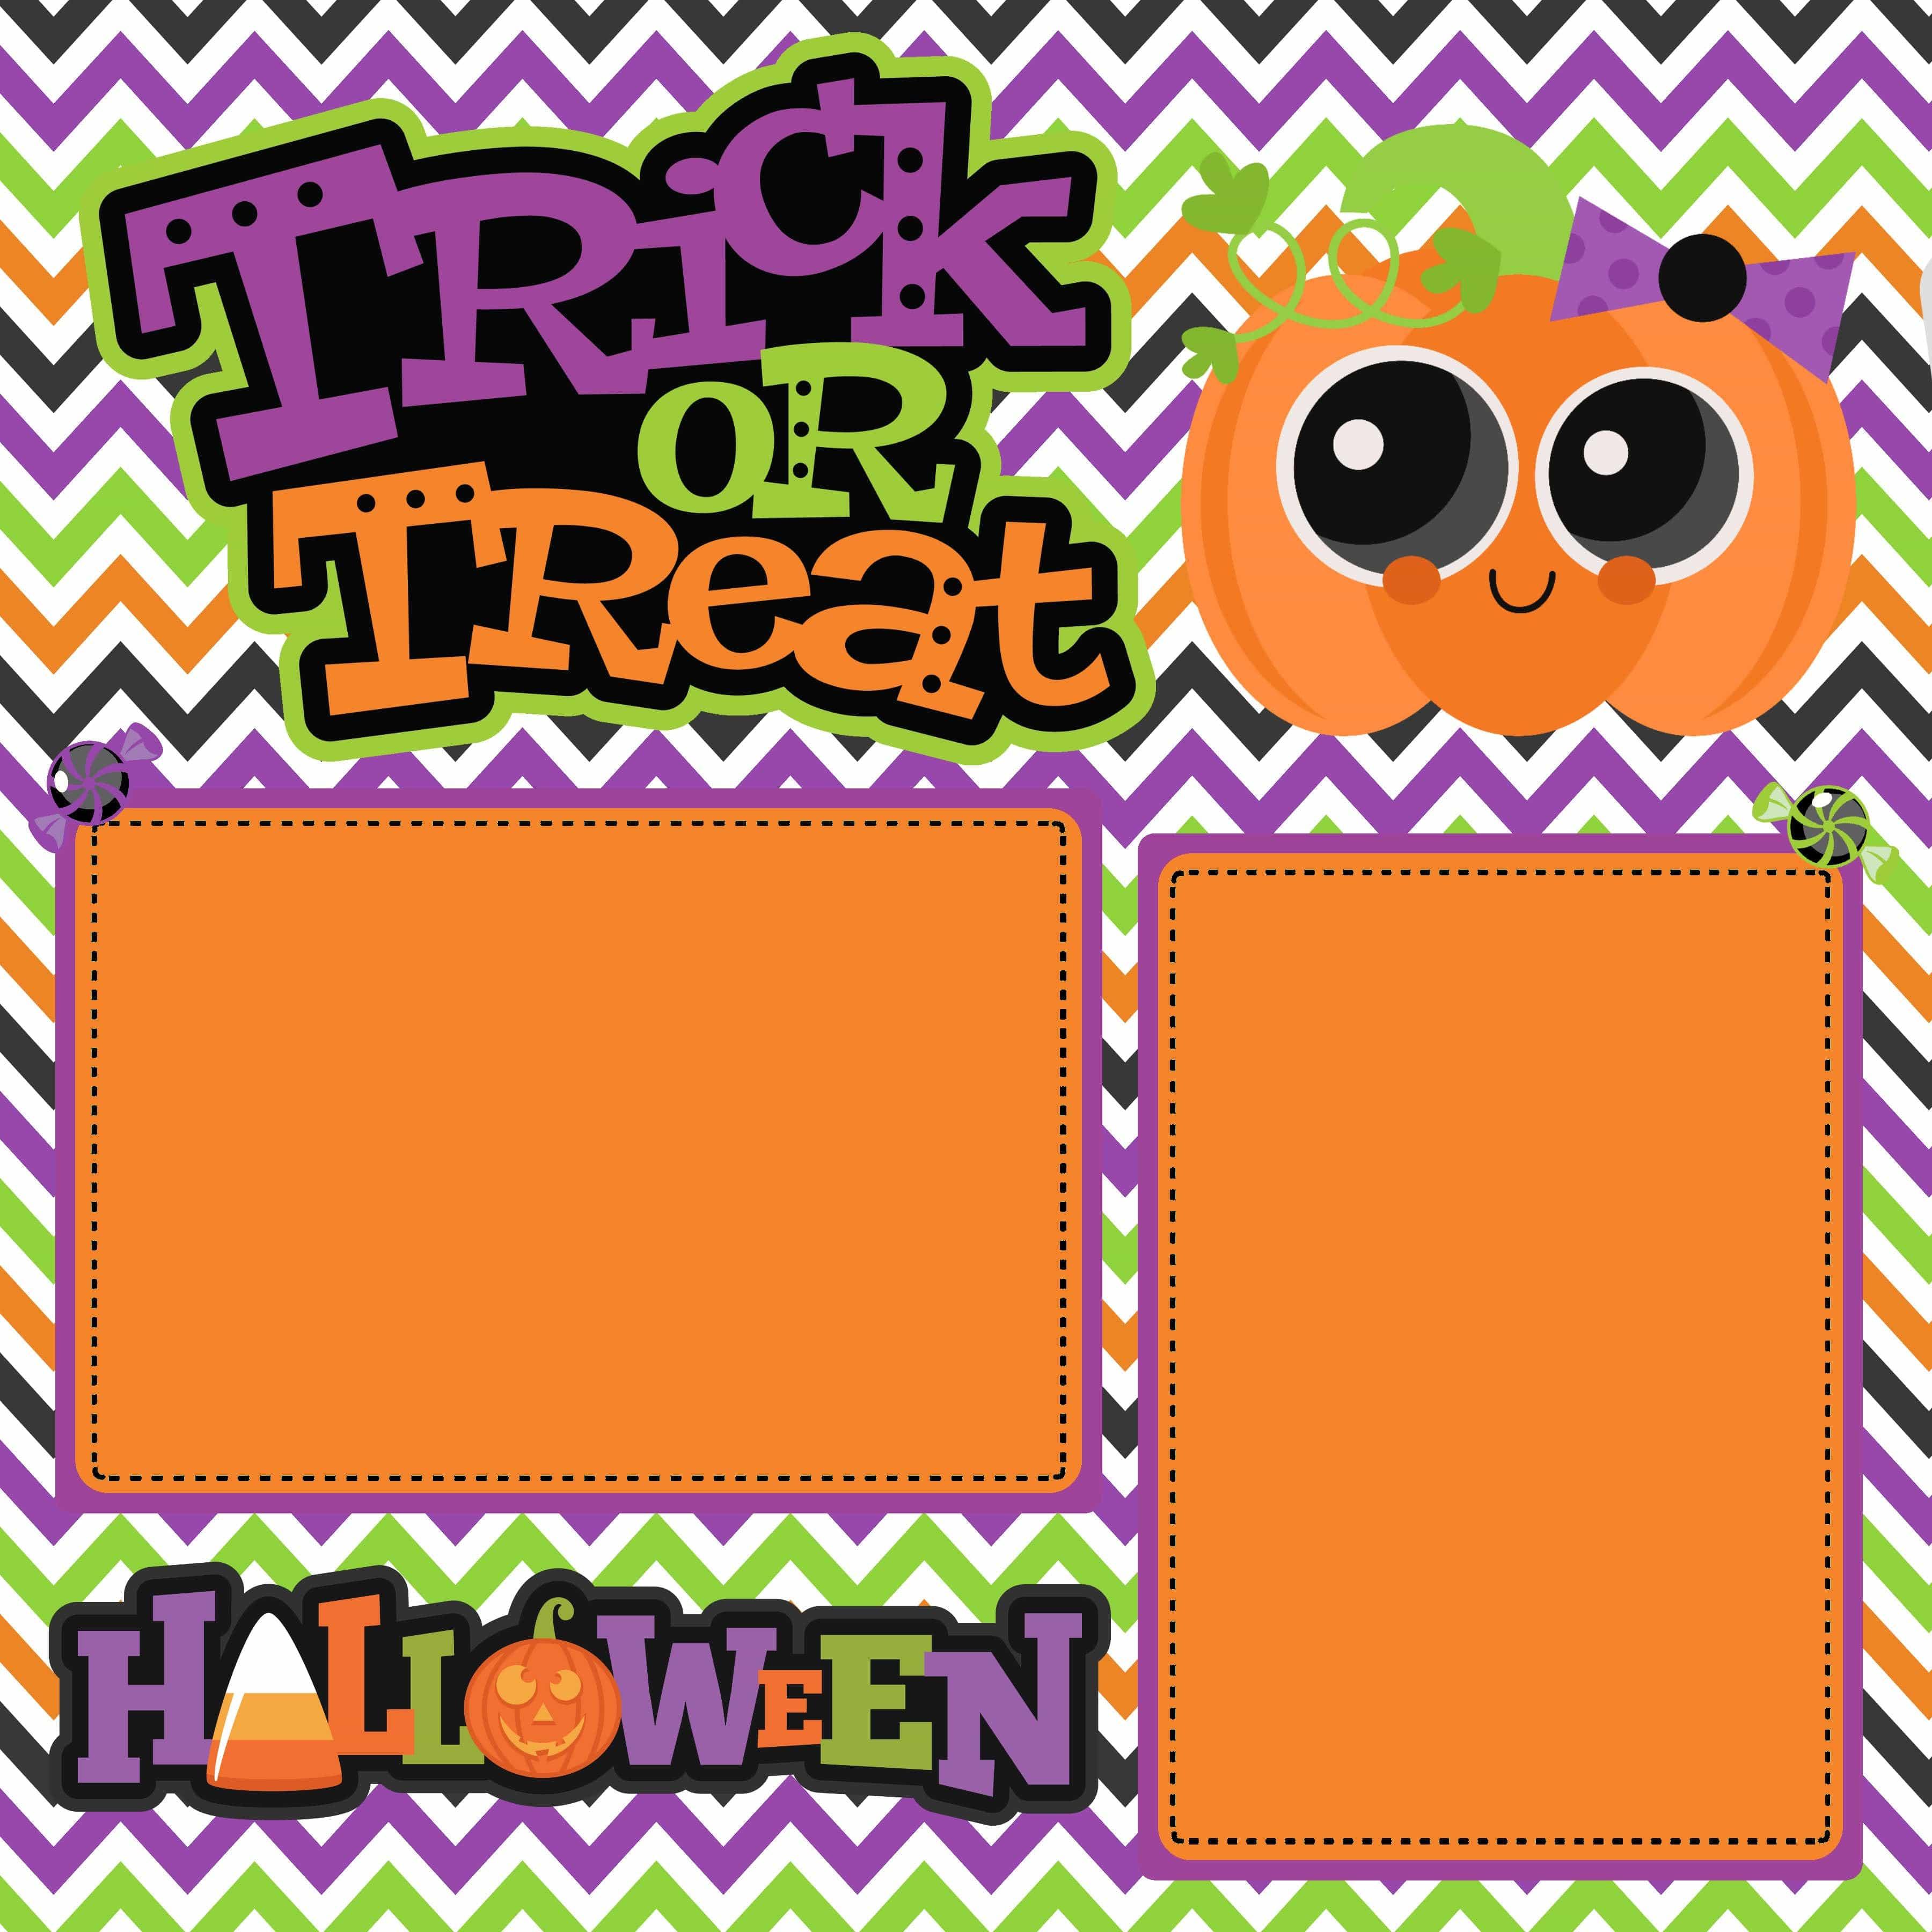 Trick Or Treat Halloween (2) - 12 x 12 Premade, Printed Scrapbook Pages by SSC Designs - Scrapbook Supply Companies